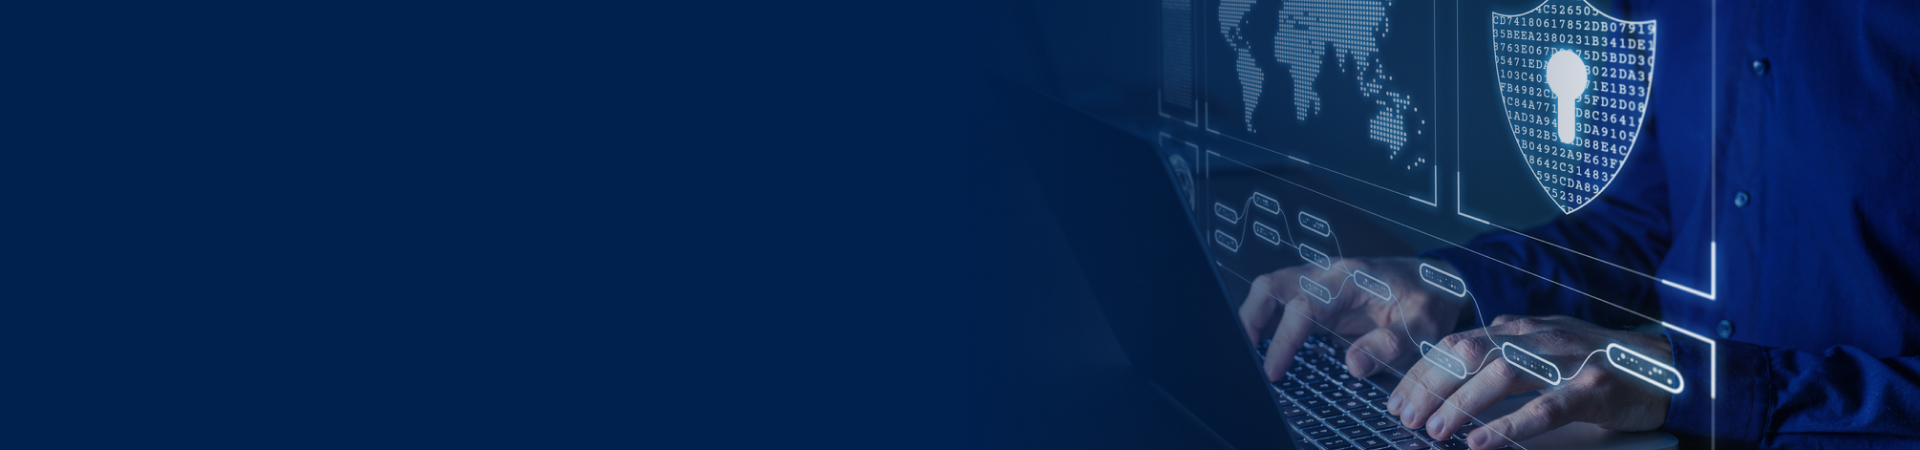 Acronis Advanced Disaster Recovery